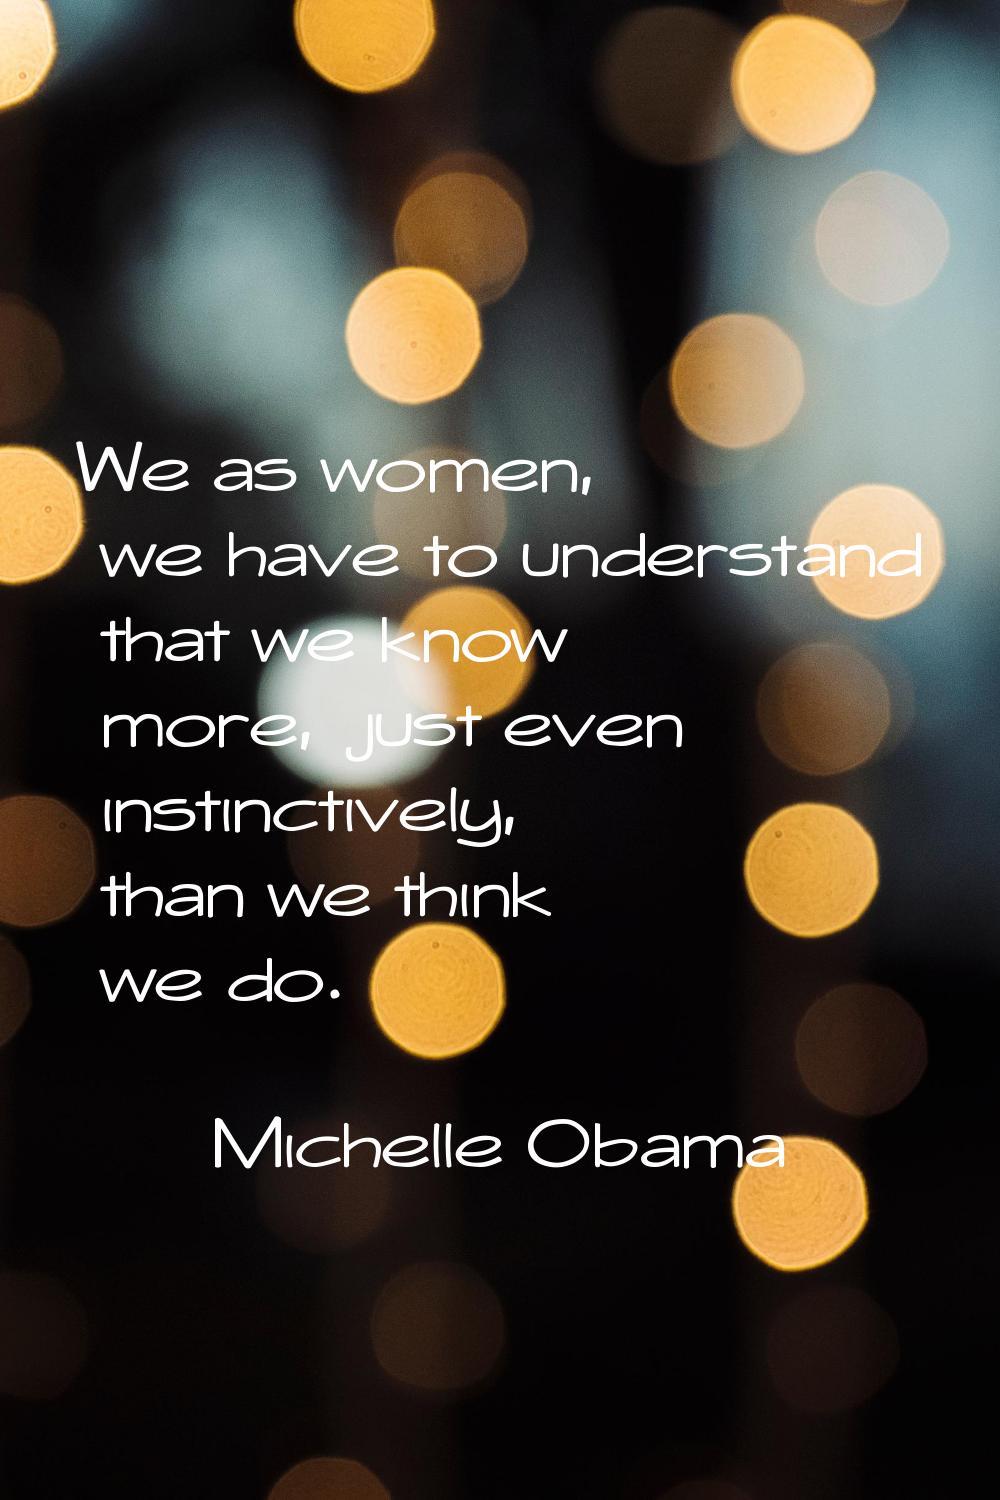 We as women, we have to understand that we know more, just even instinctively, than we think we do.